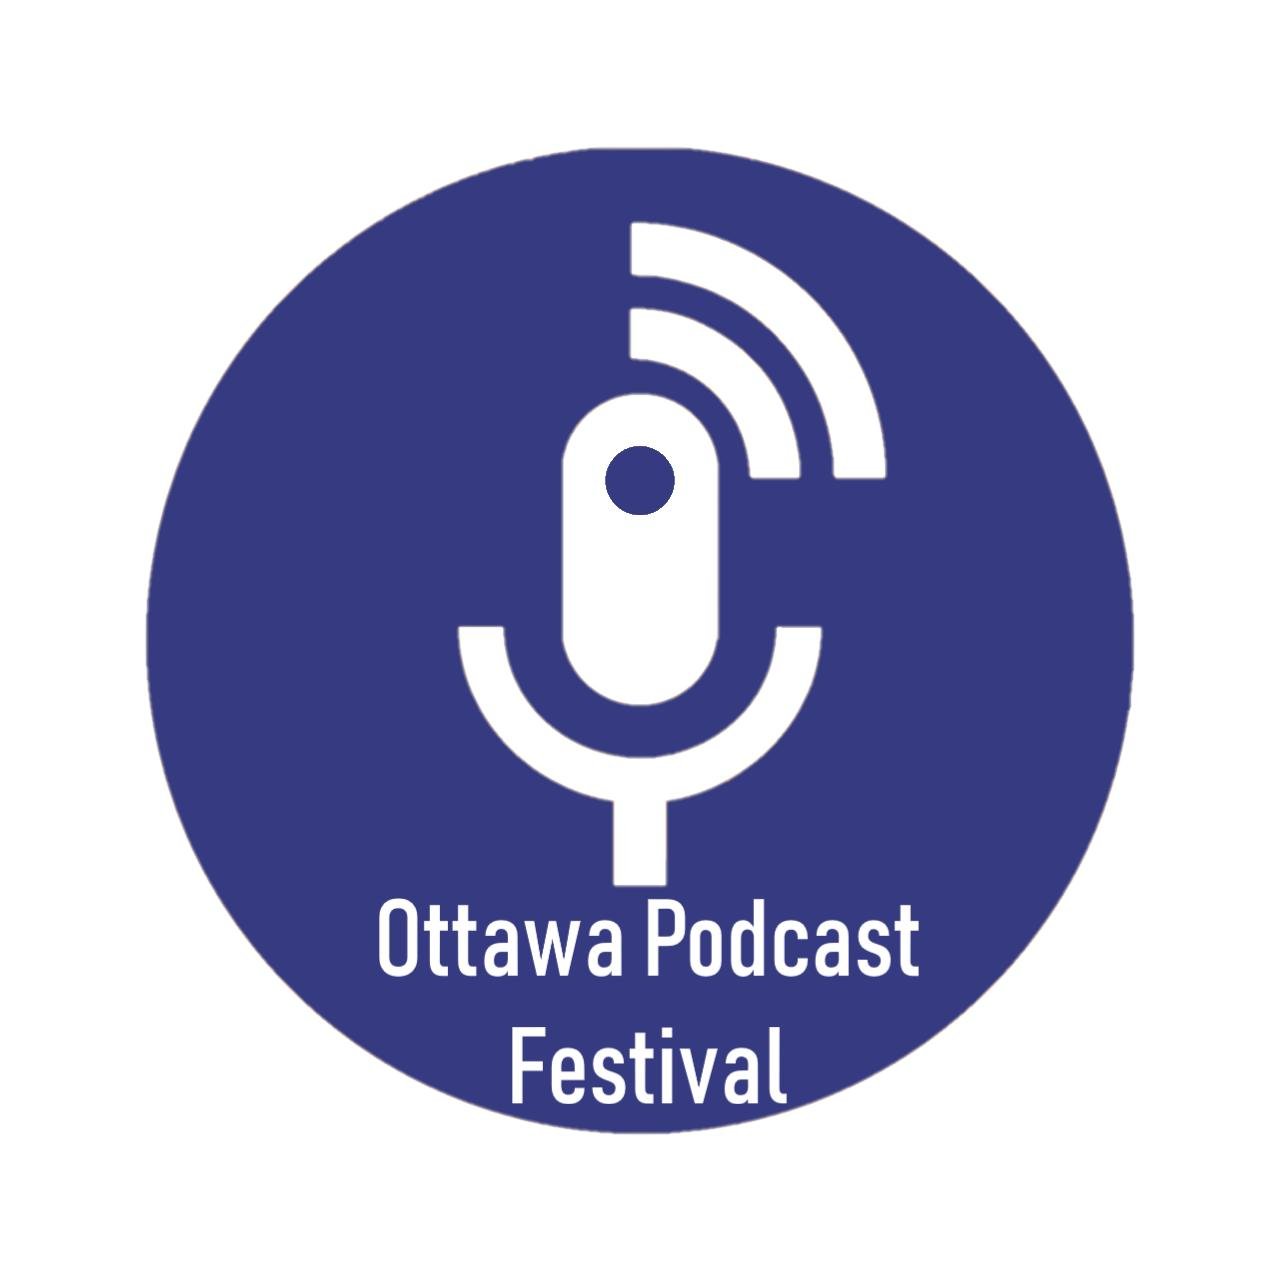 Ottawa’s first Podcast Festival is happening on August 24, 2019 at the Live on Elgin! Visit our website for line up and ticket information!